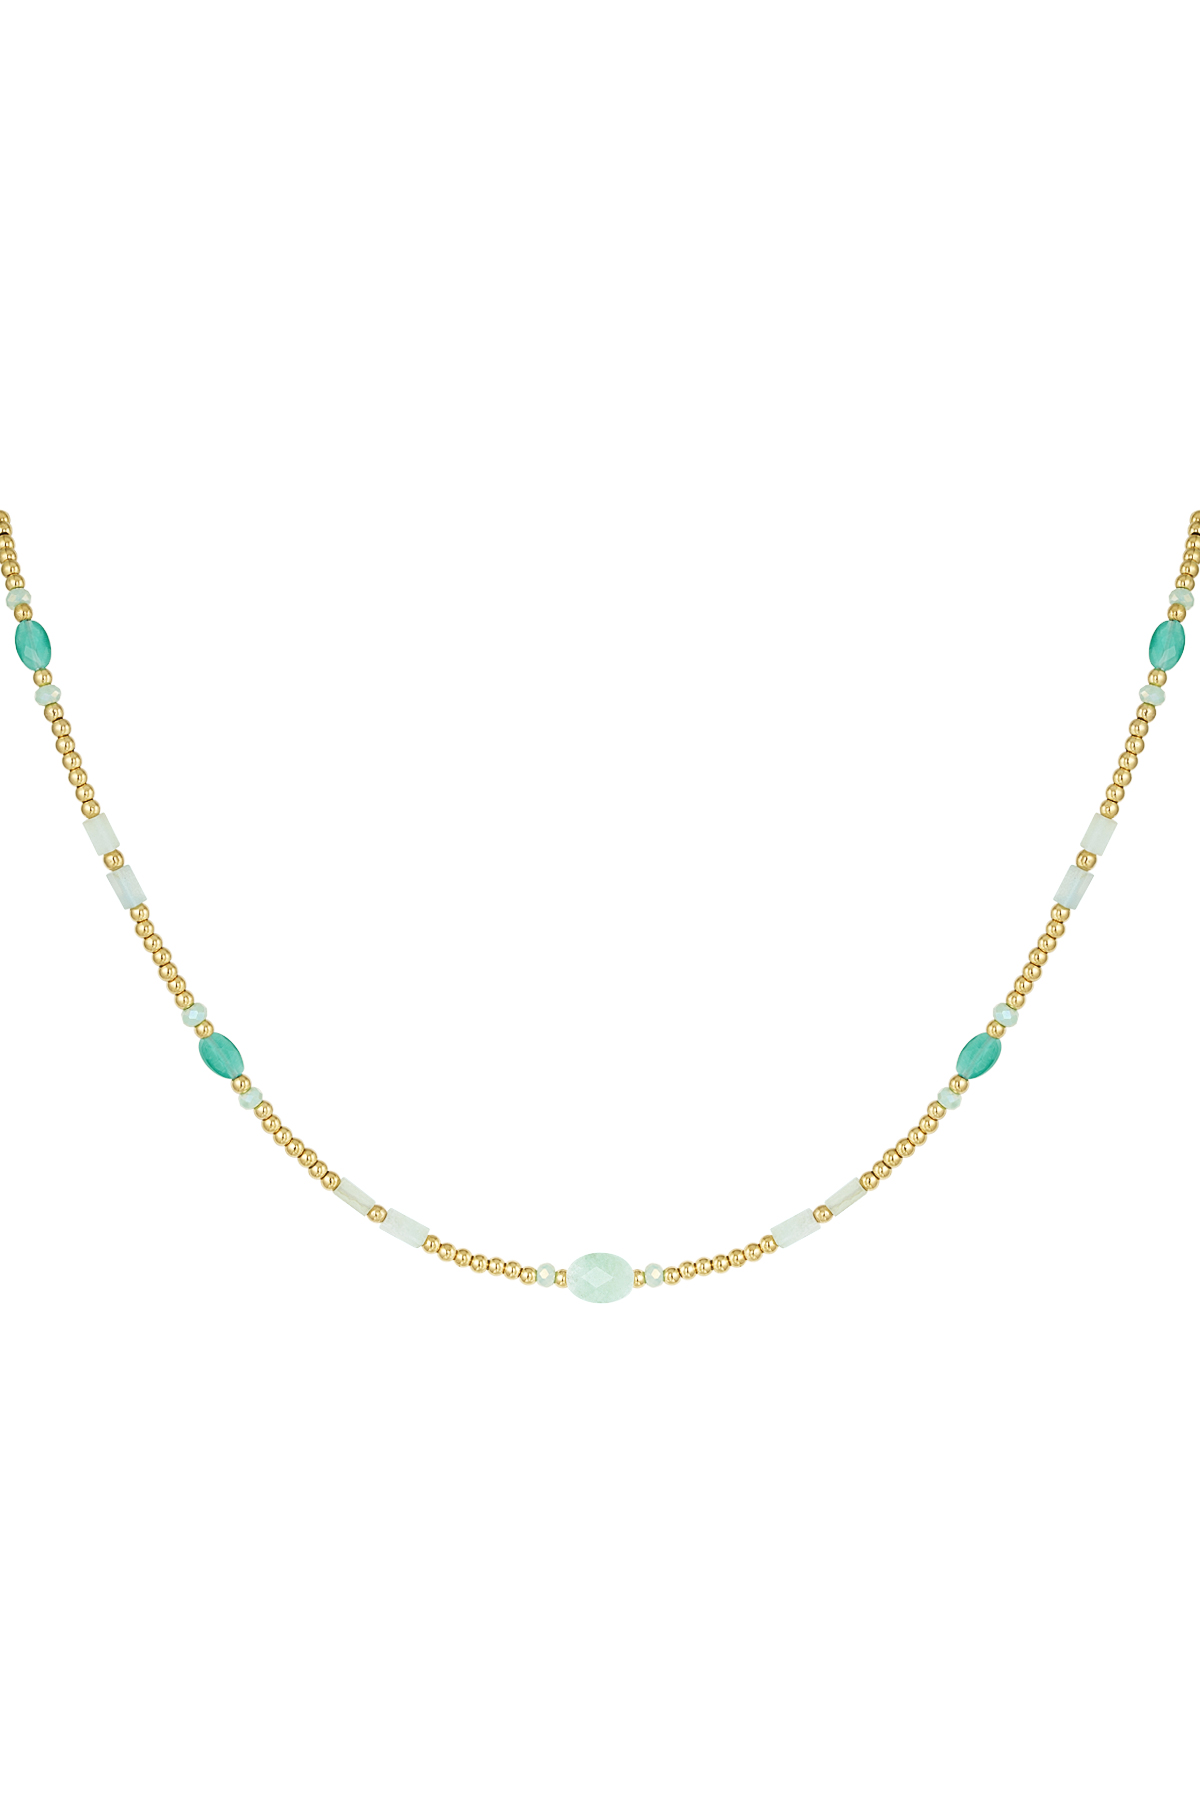 Beaded necklace colorful details - green &amp; gold Stainless Steel